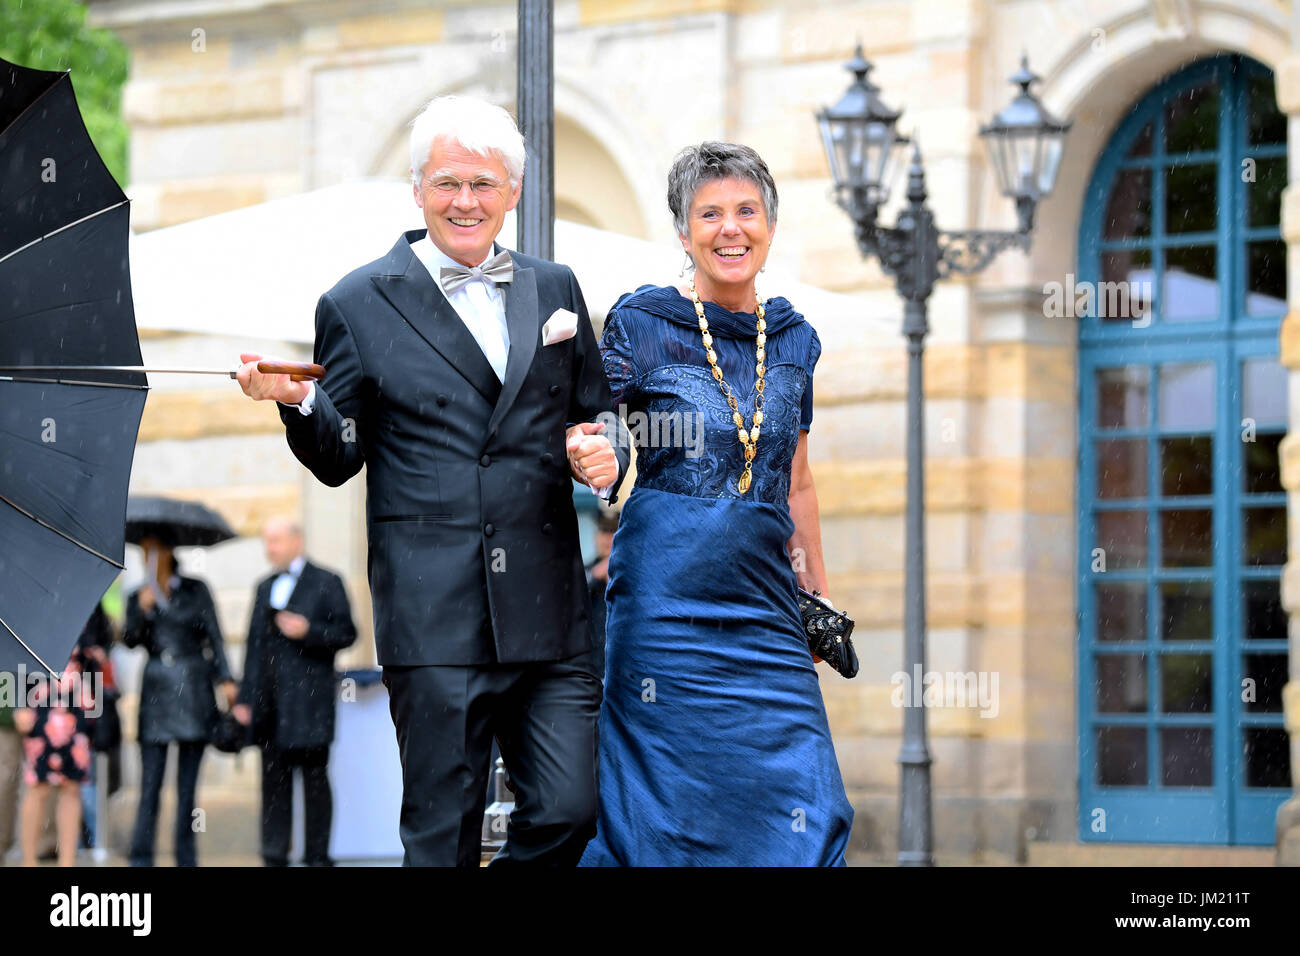 Bayreuth, Germany. 25th July, 2017. The mayor of Bayreuth, Brigitte Merk-Erbe (R) and her husband Thomas Erbe arrive for the opening of the festival in Bayreuth, Germany, 25 July 2017. The Richard Wagner Festival will be opened with the opera 'The Master-Singers of Nuremberg'. Photo: Tobias Hase/dpa/Alamy Live News Stock Photo